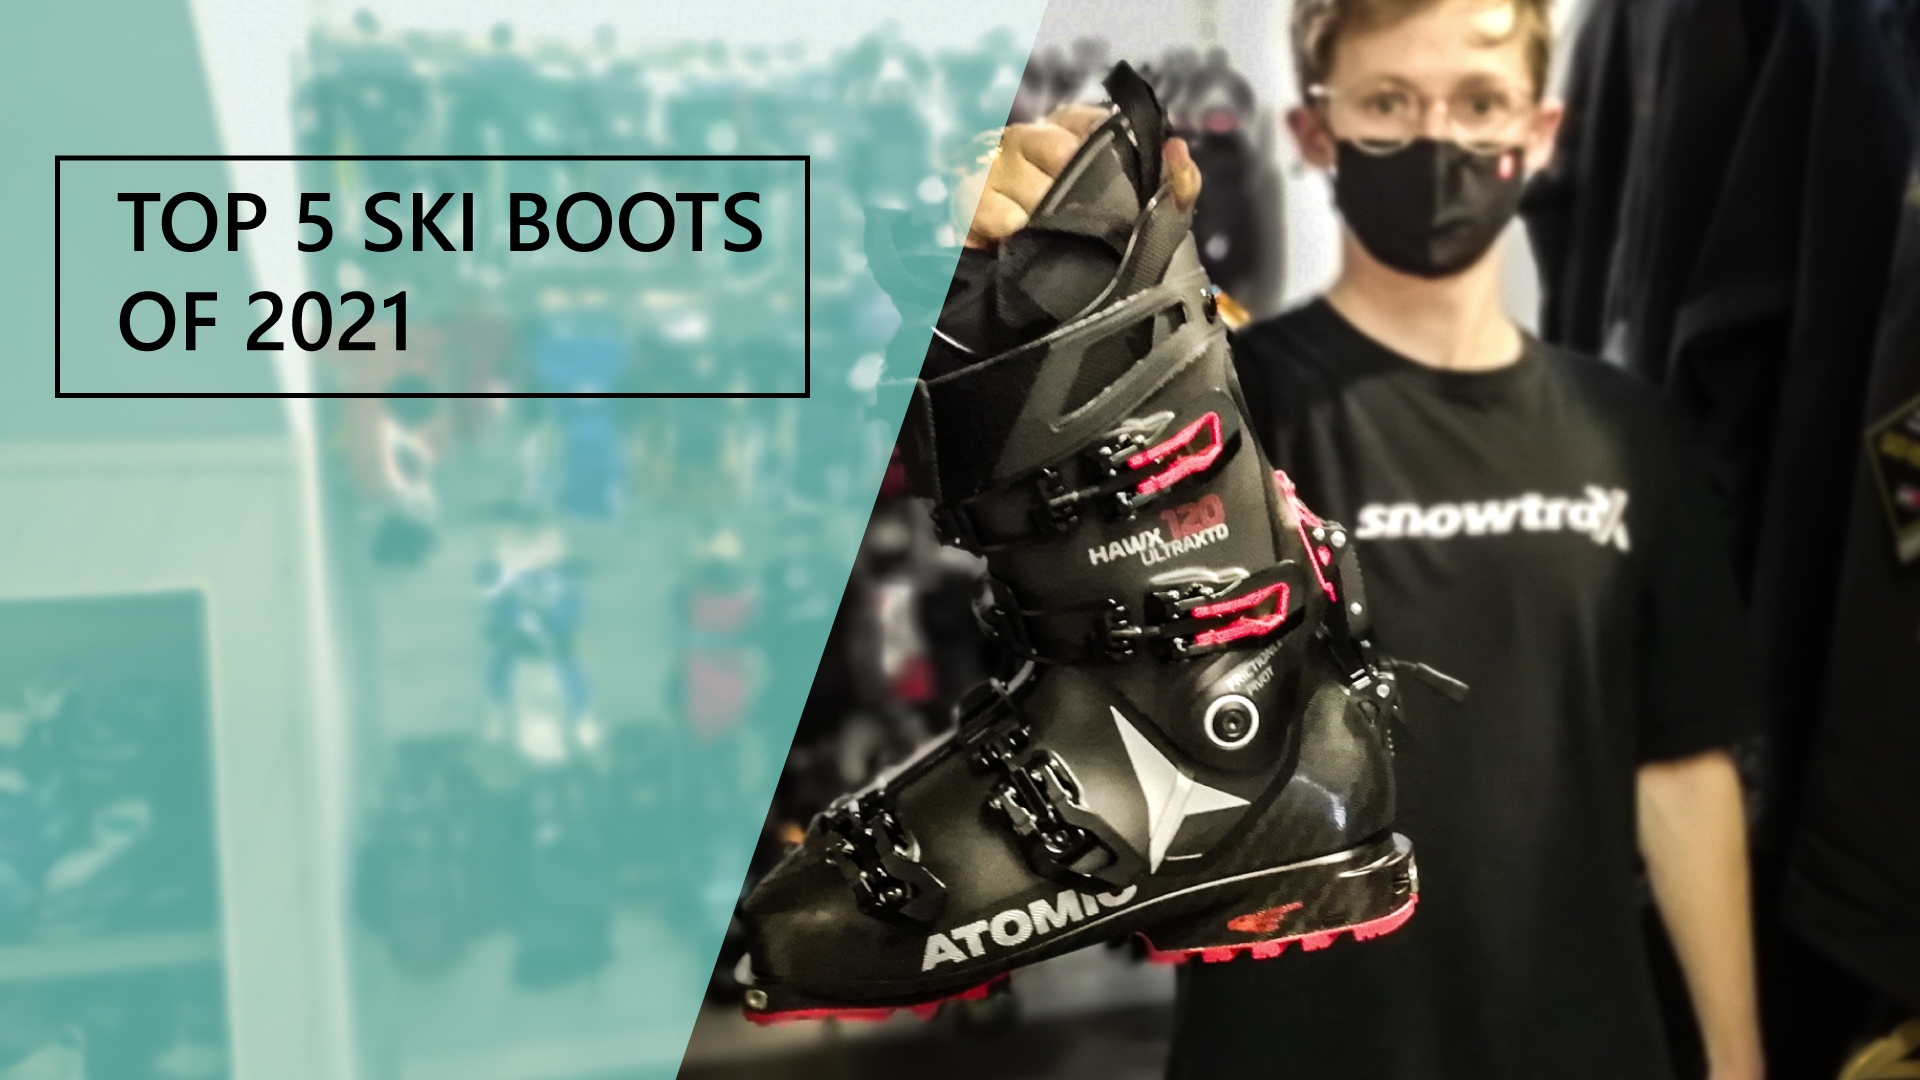 Top 5 Ski Boots of 2021